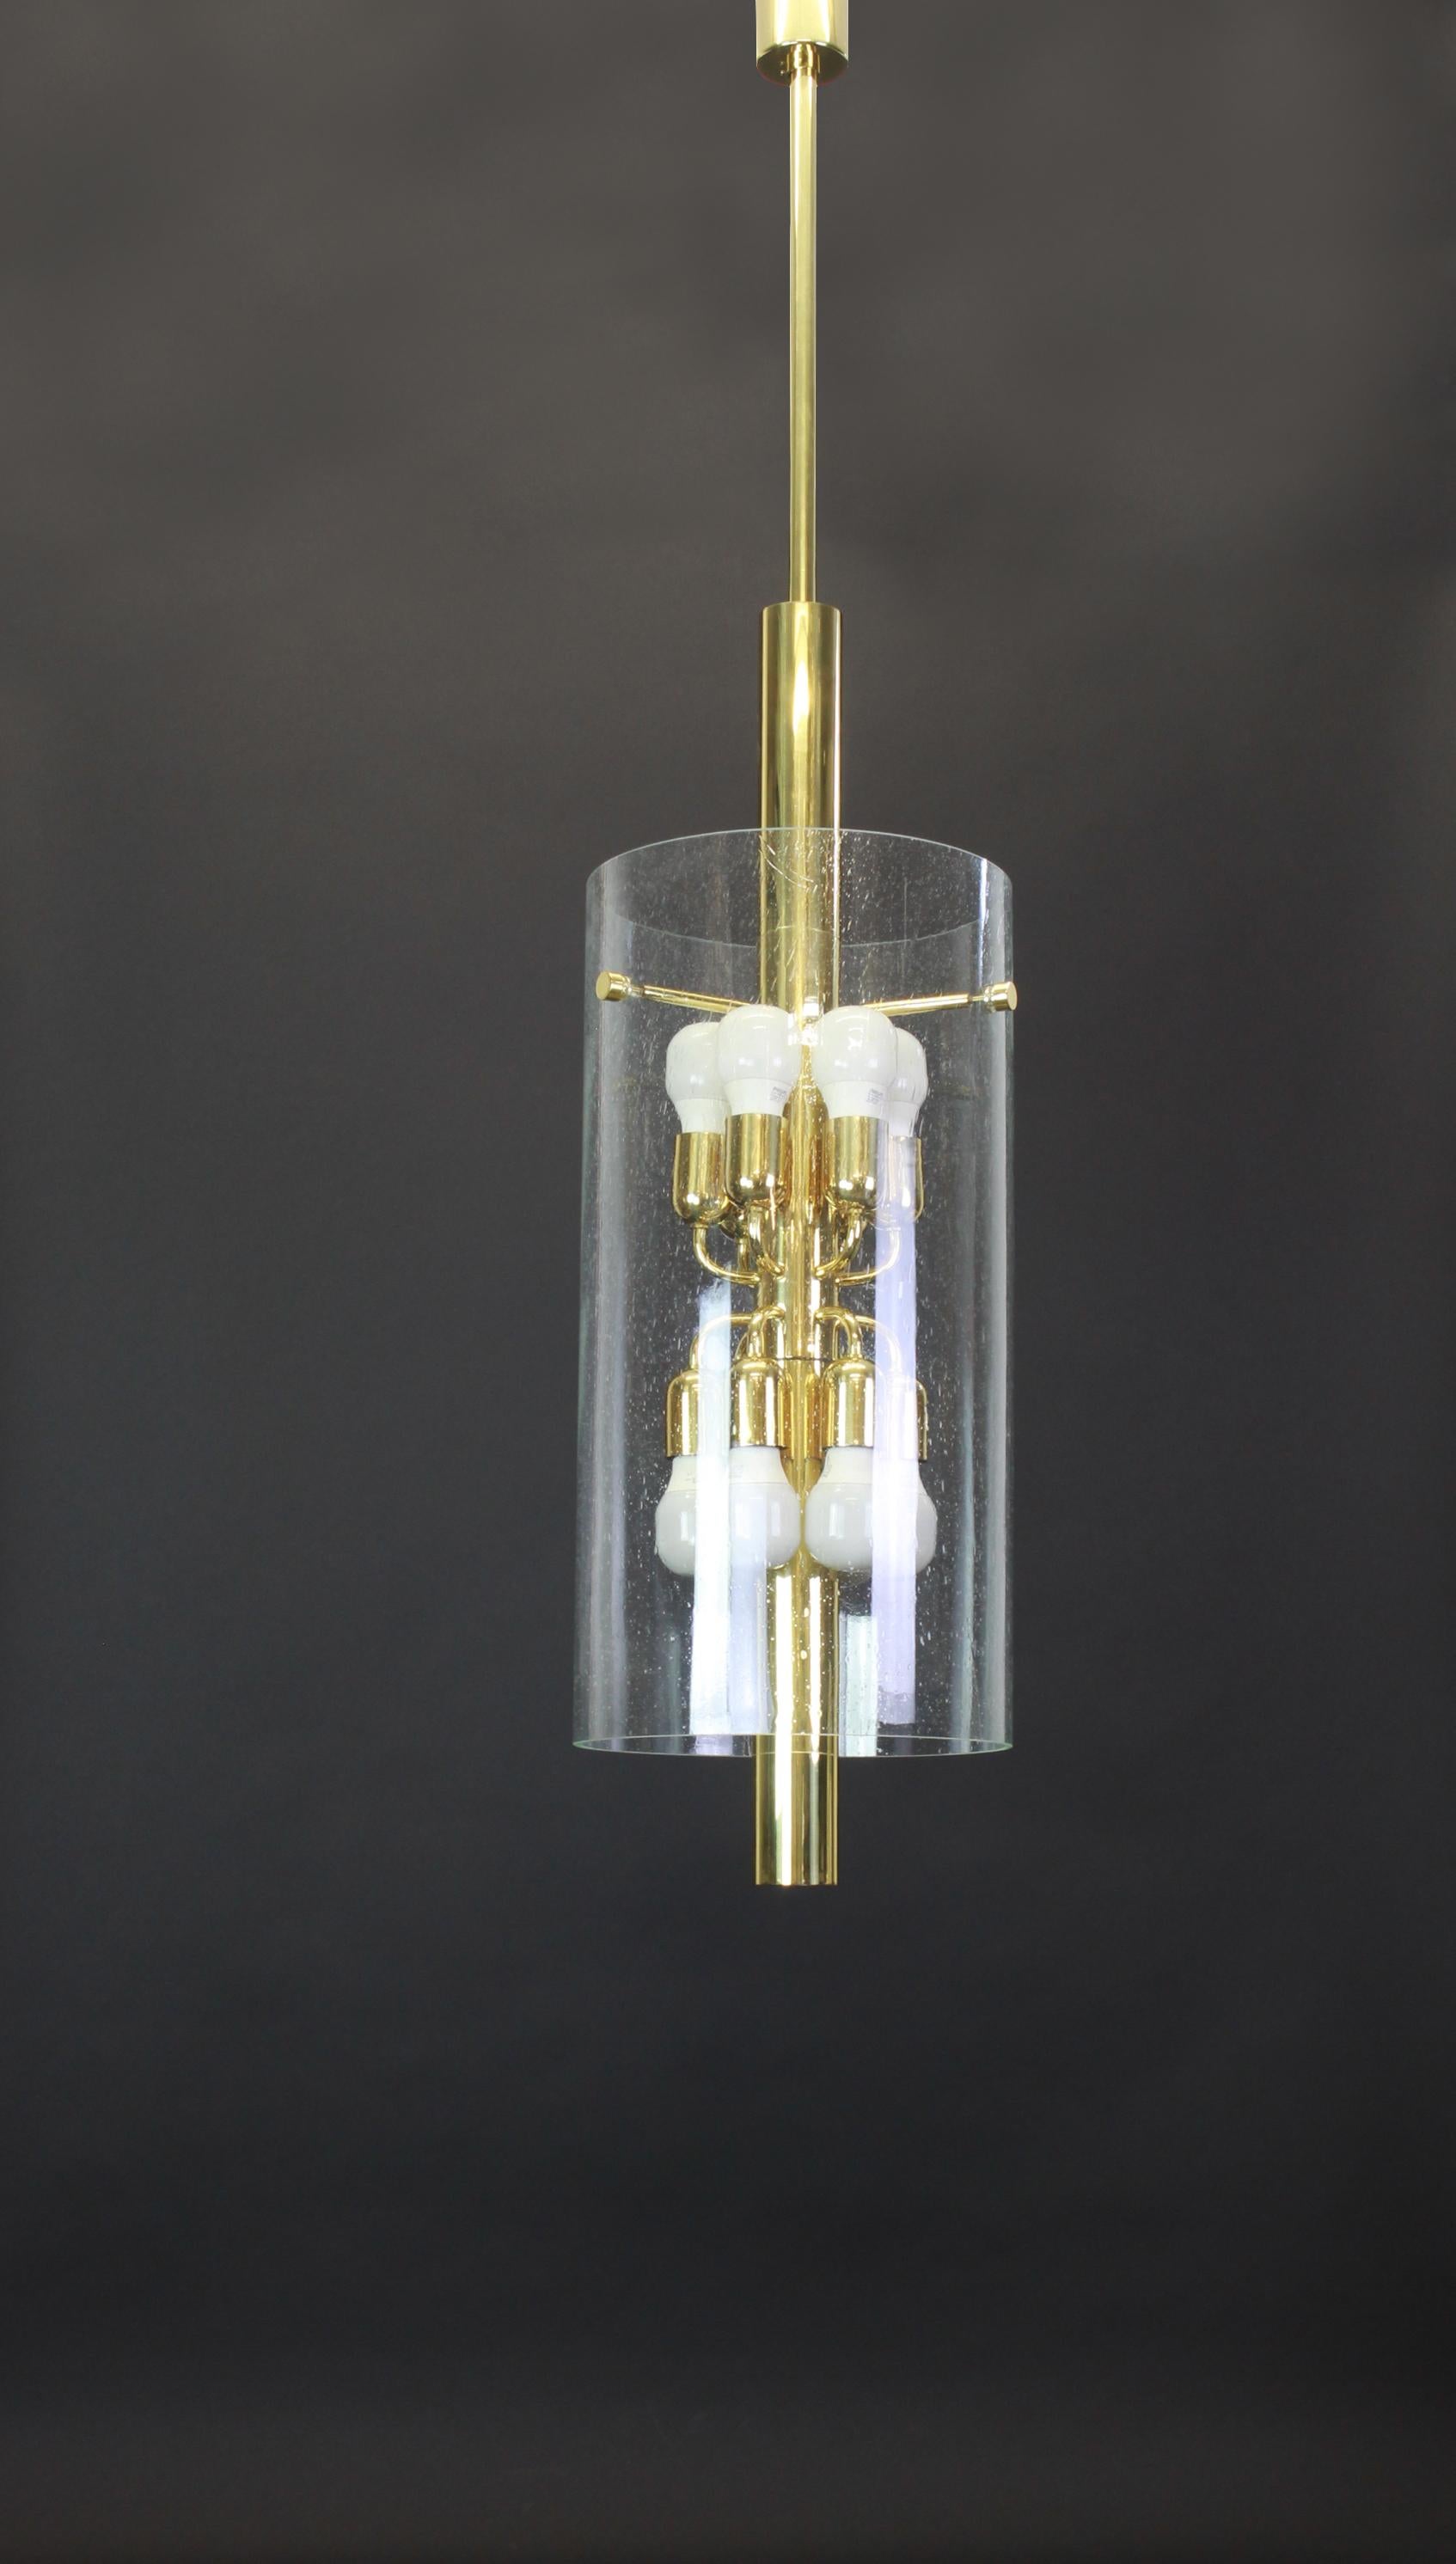 Brass pendant fixture with cylindrical glass shade featuring inclusive glass bubble design by Limburg, Germany, 1960s

Heavy quality and in very good condition. Cleaned, well-wired and ready to use. The fixture requires 12 x E27 Standard bulbs